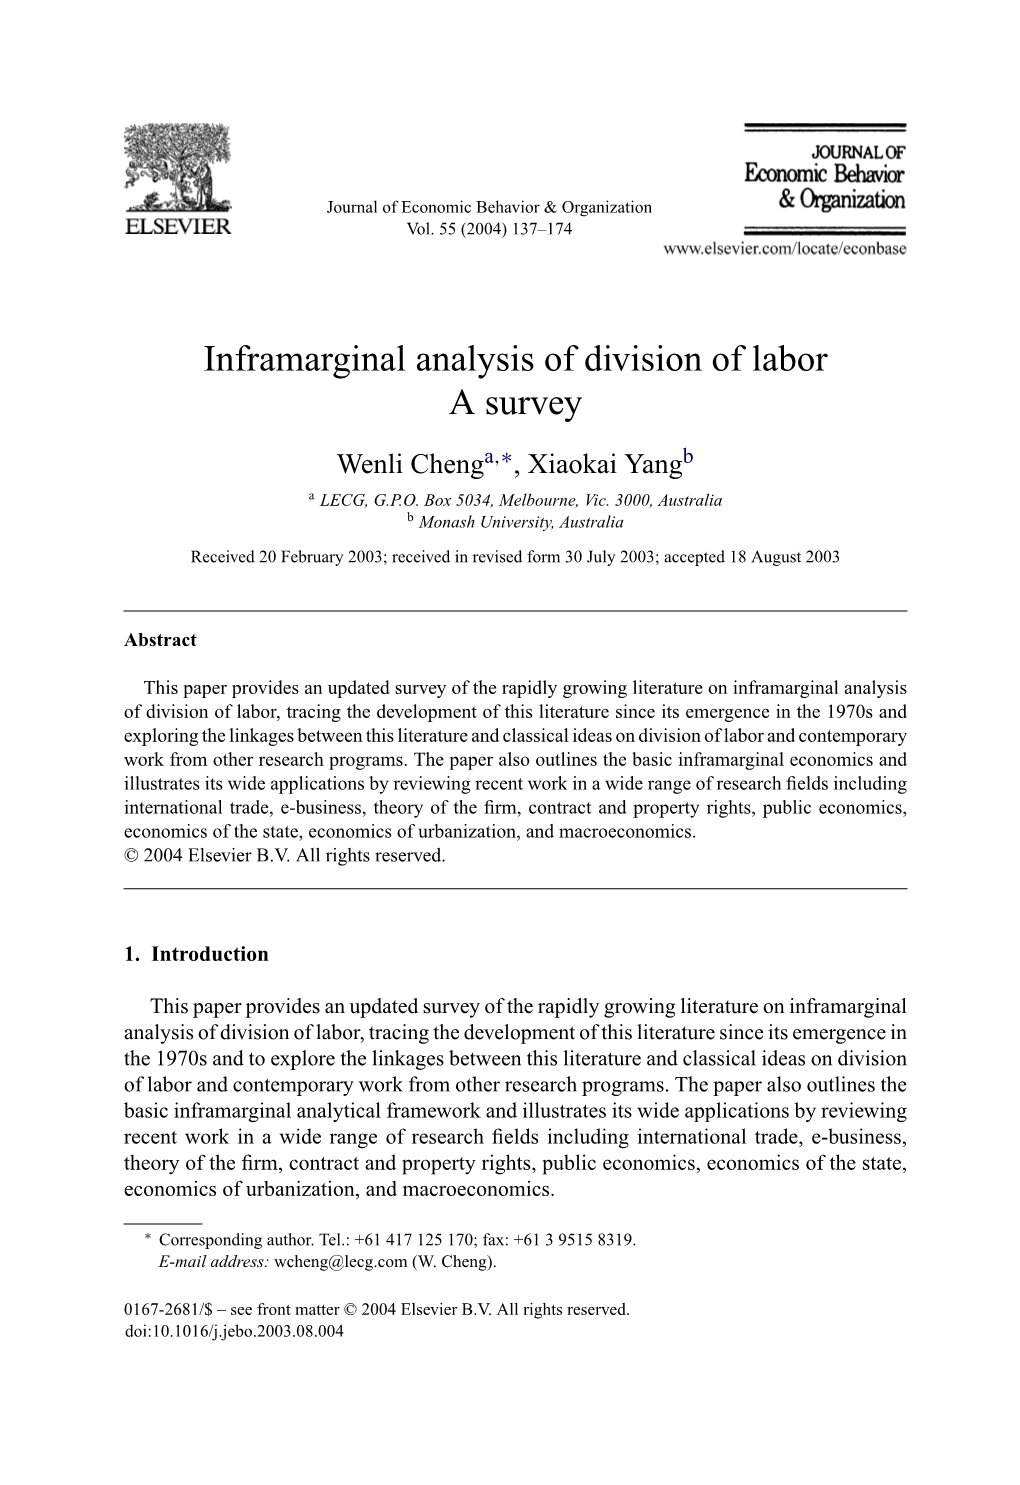 Inframarginal Analysis of Division of Labor: a Survey